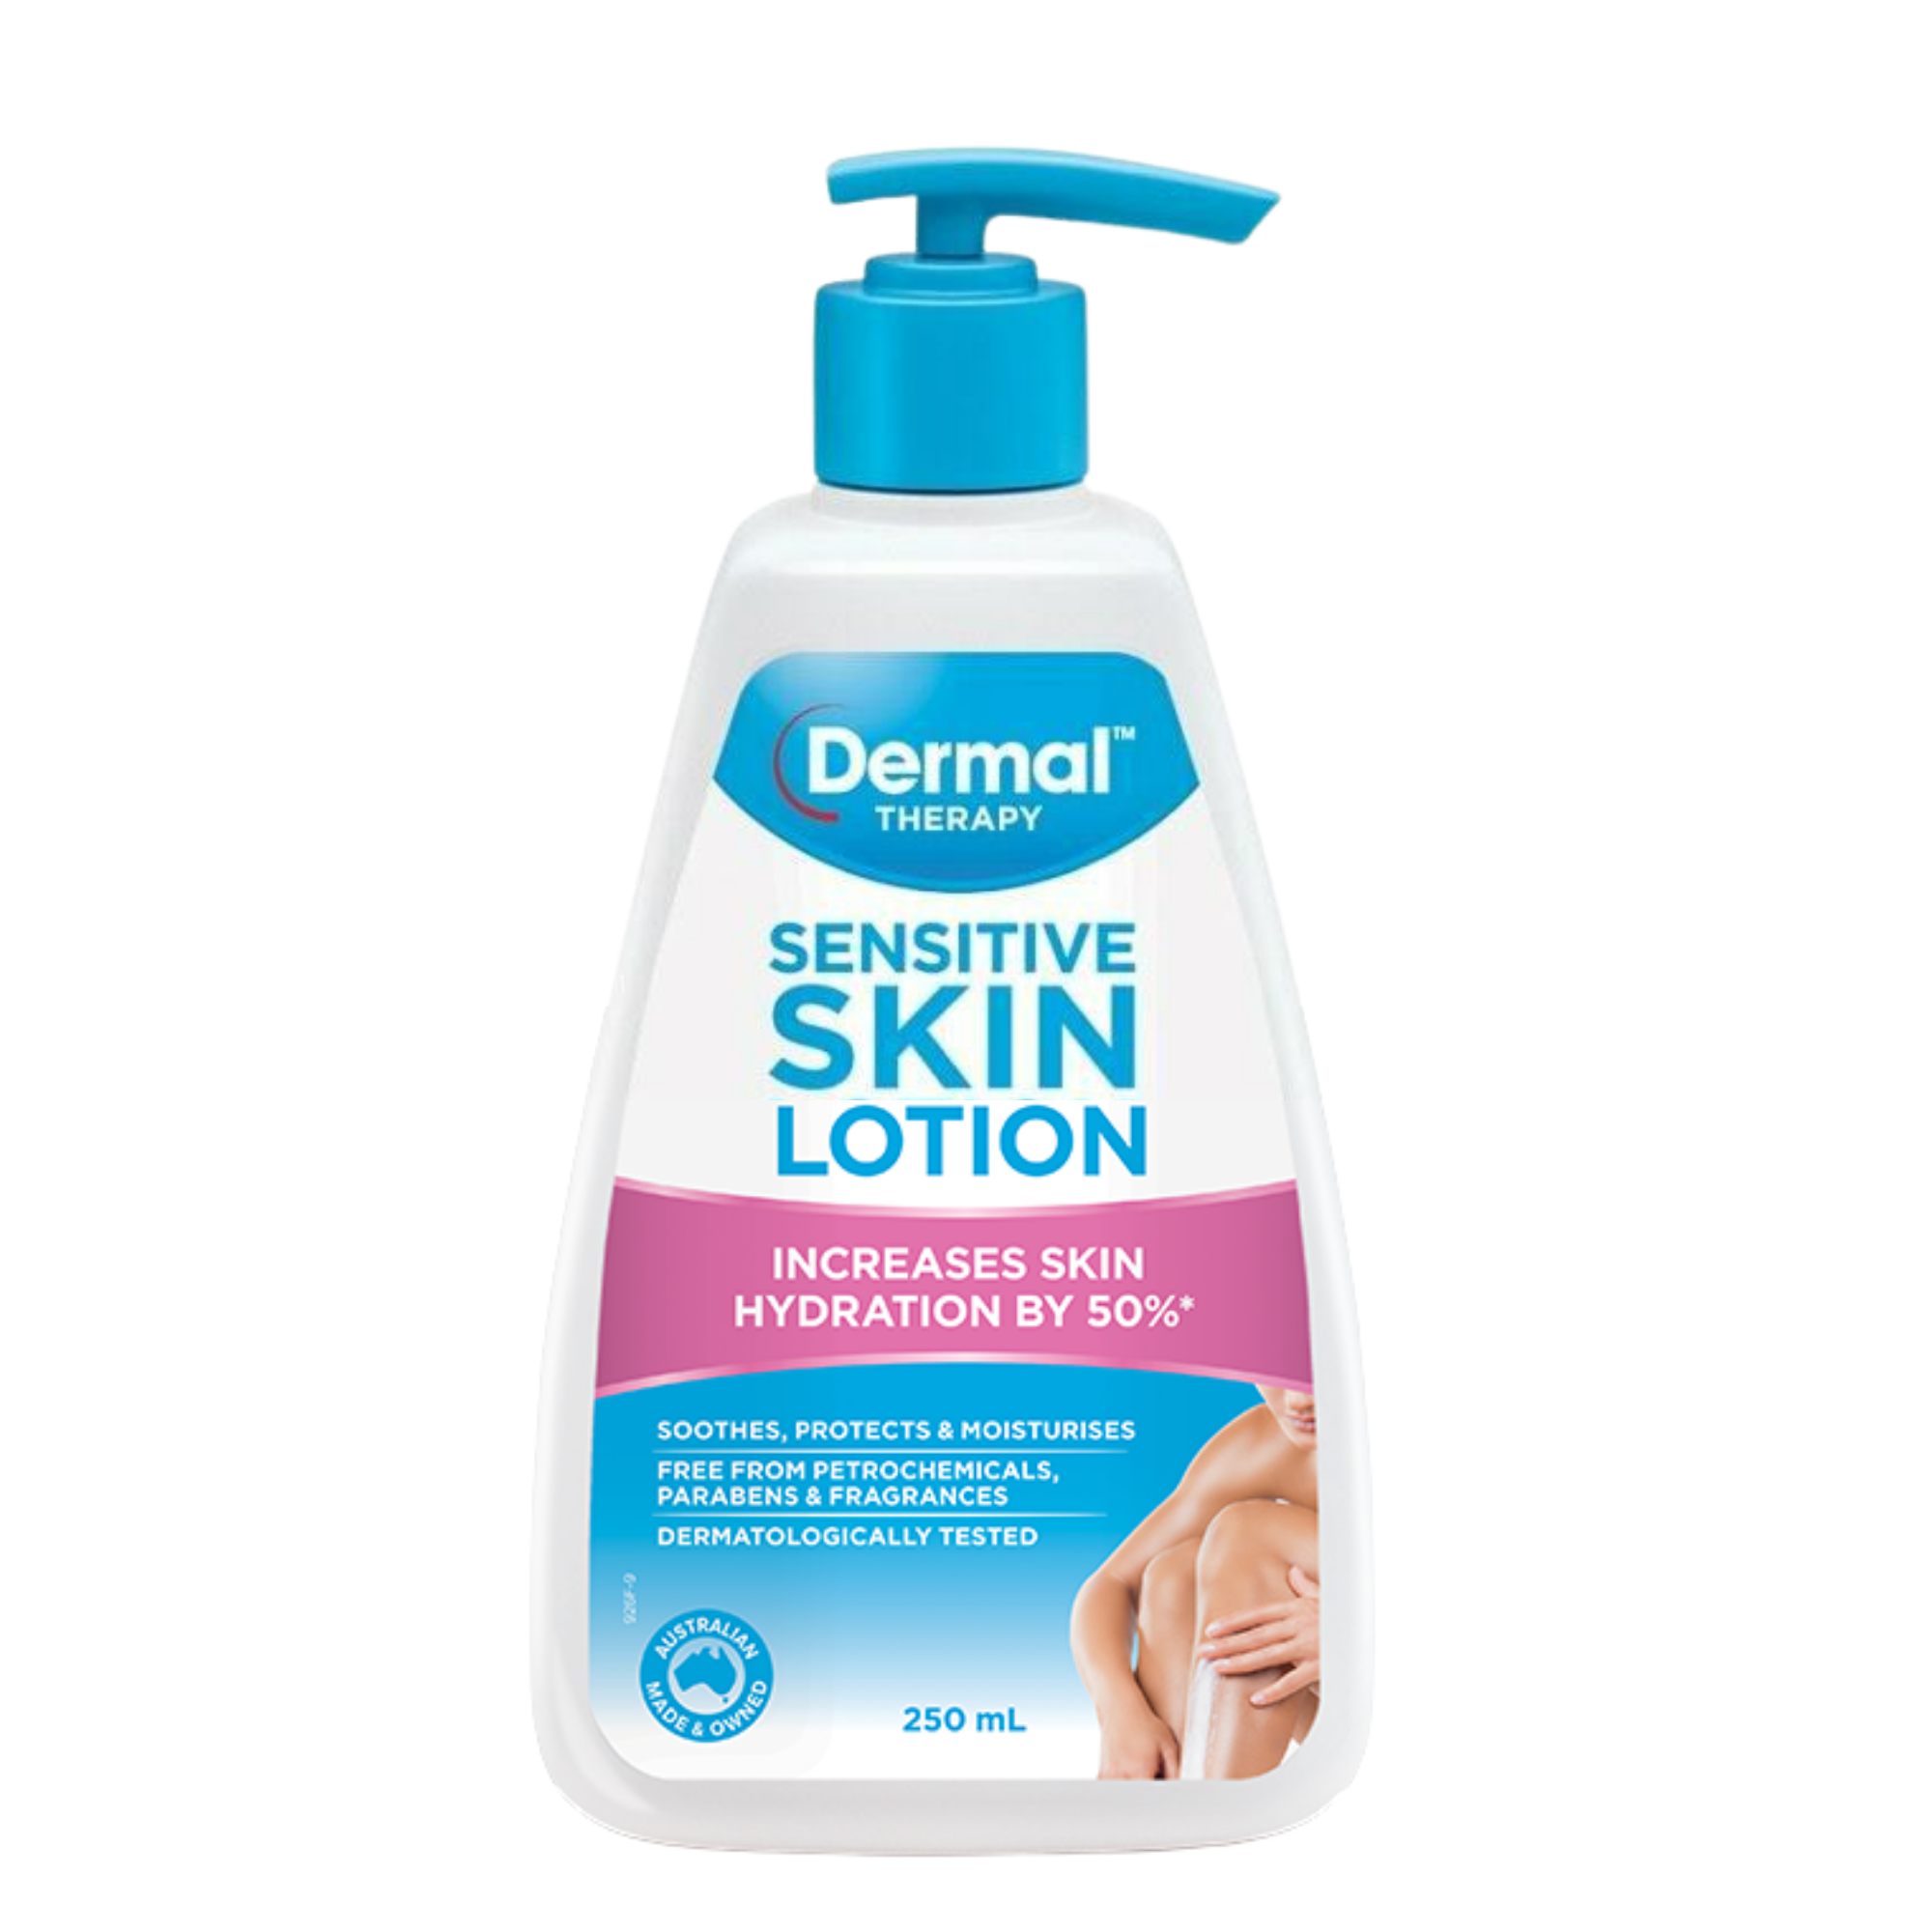 Gently massage Dermal Therapy Sensitive Skin Lotion into the skin as needed. For best results, use in conjunction with Dermal Therapy Sensitive Skin Wash.